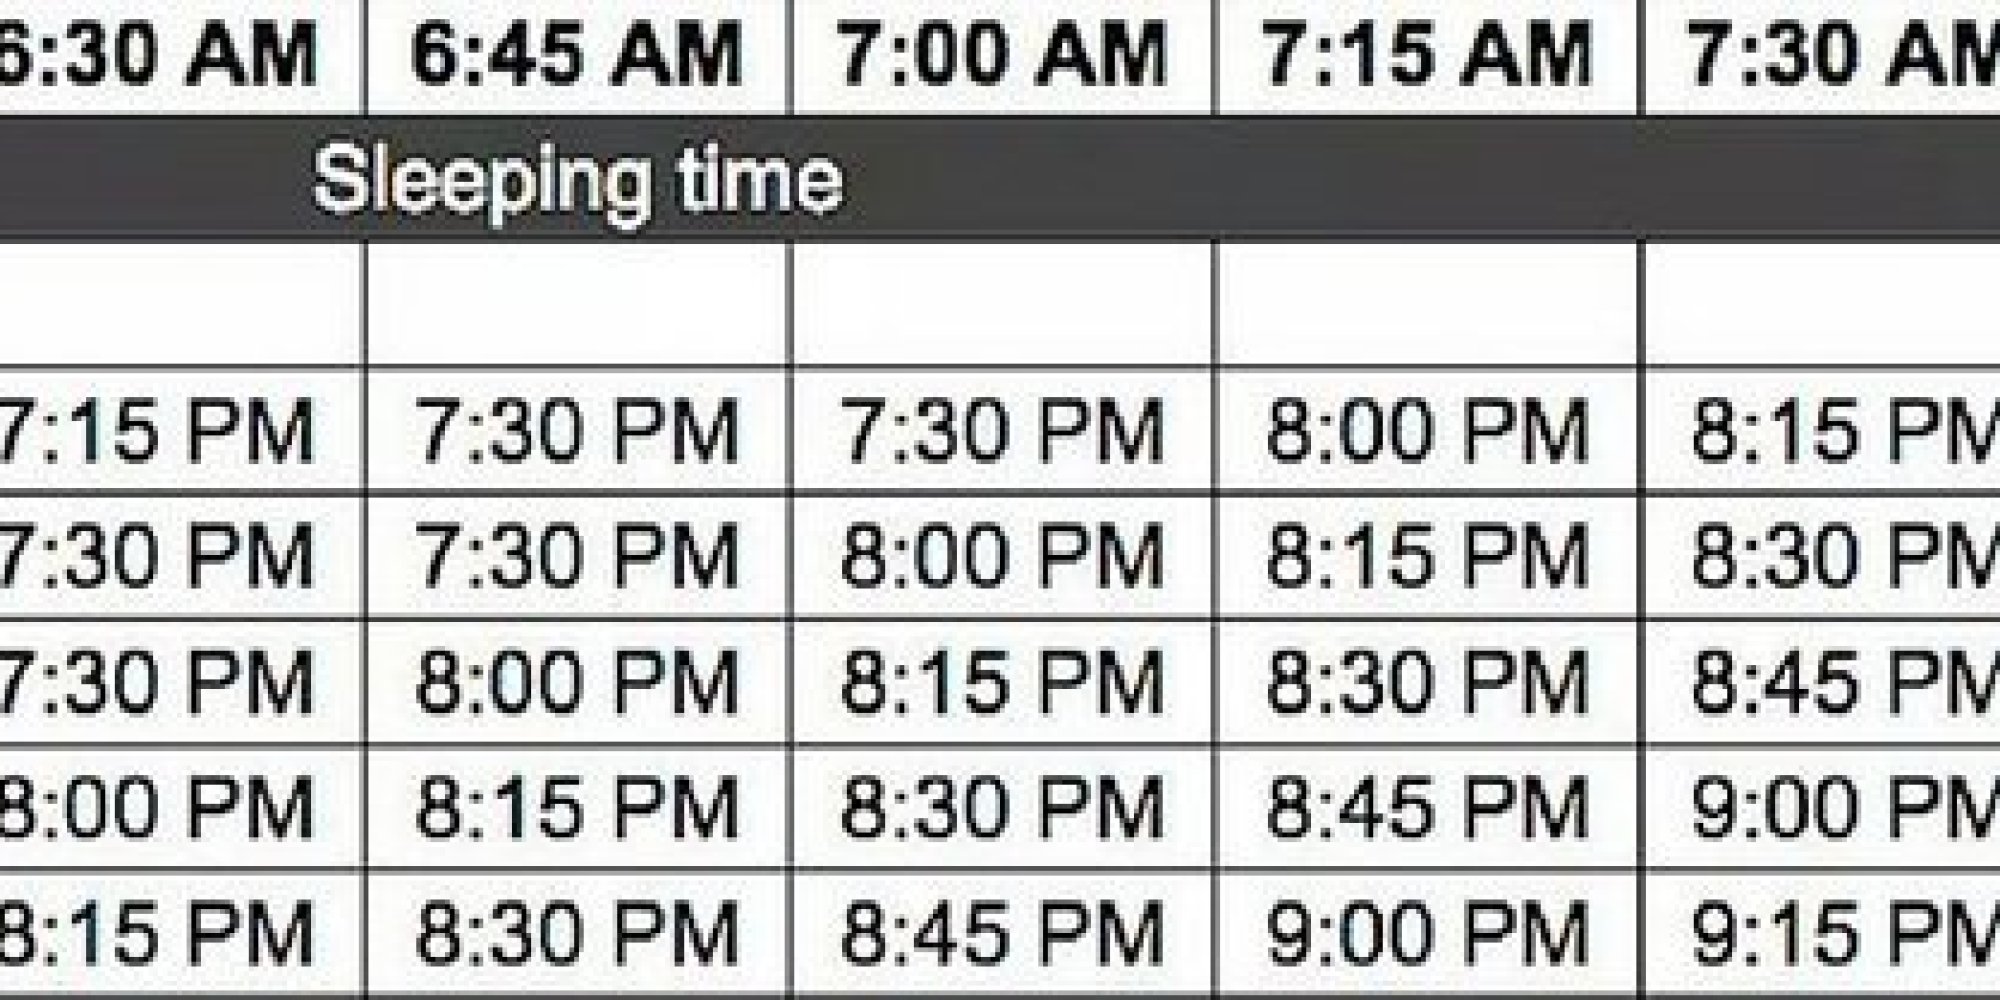 Kid's Bedtime Chart Shared By School Shows Recommended Times Children